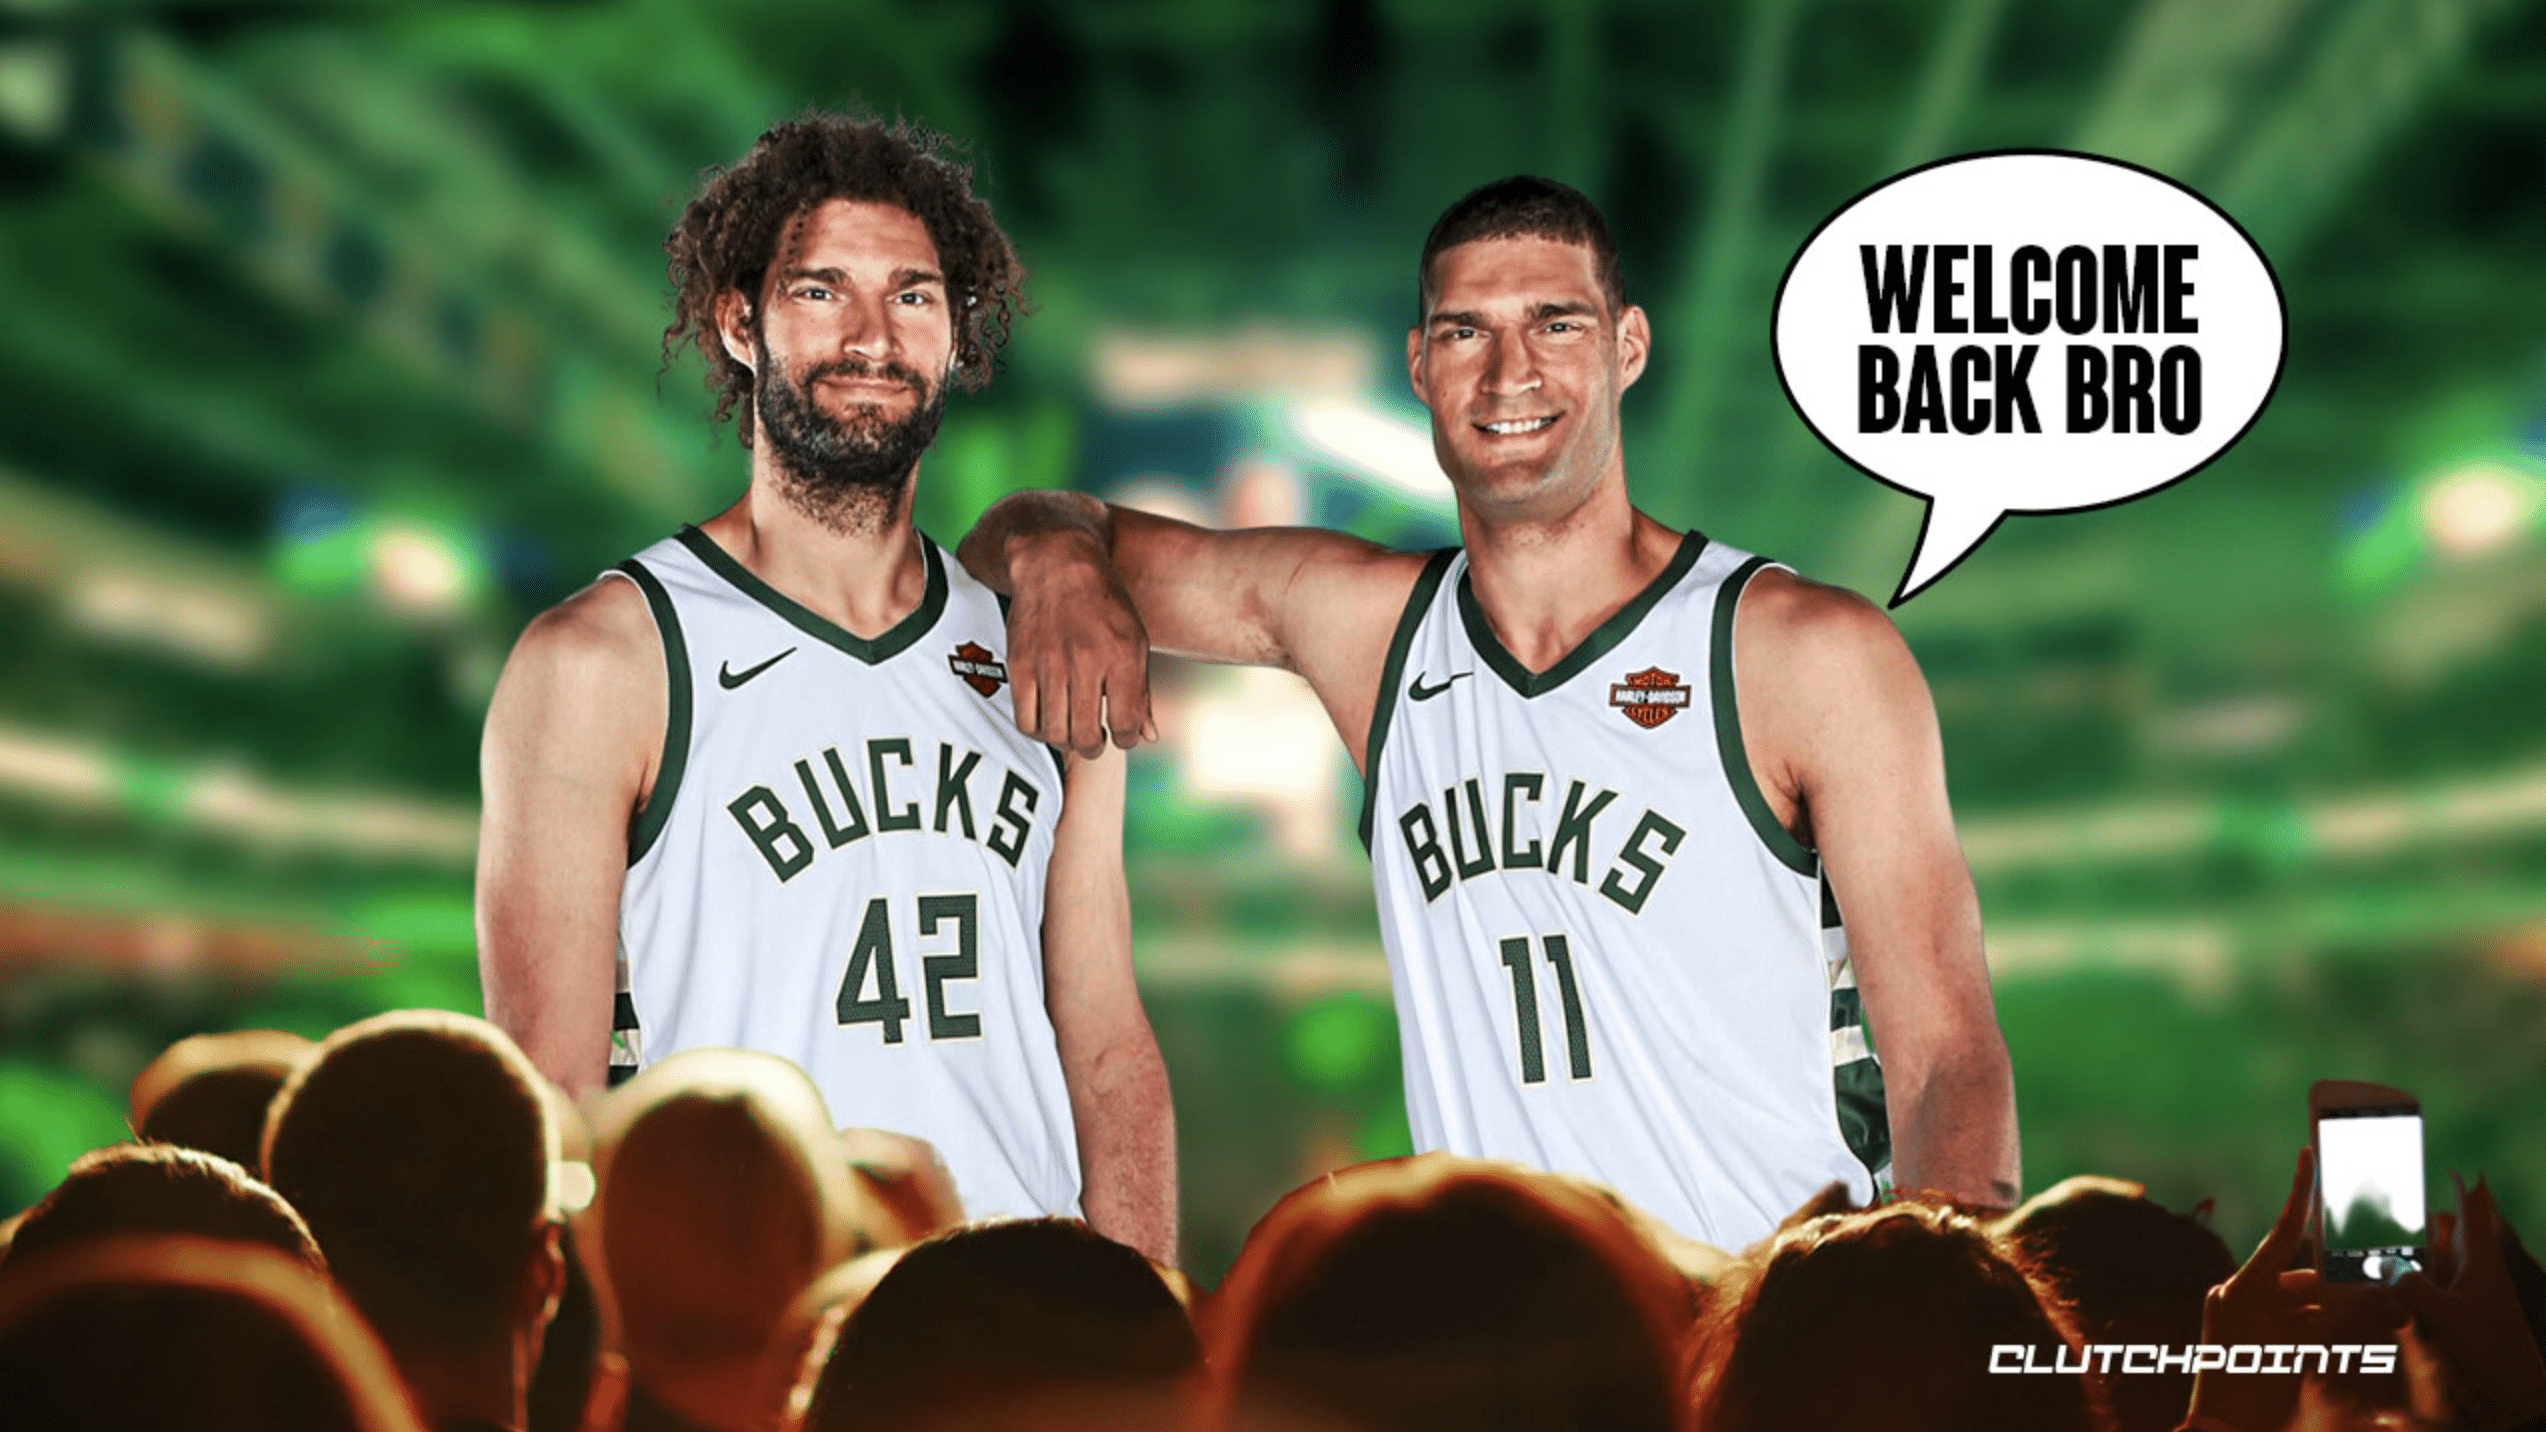 Family reunion: Bucks add Brook Lopez's twin brother Robin in free agency